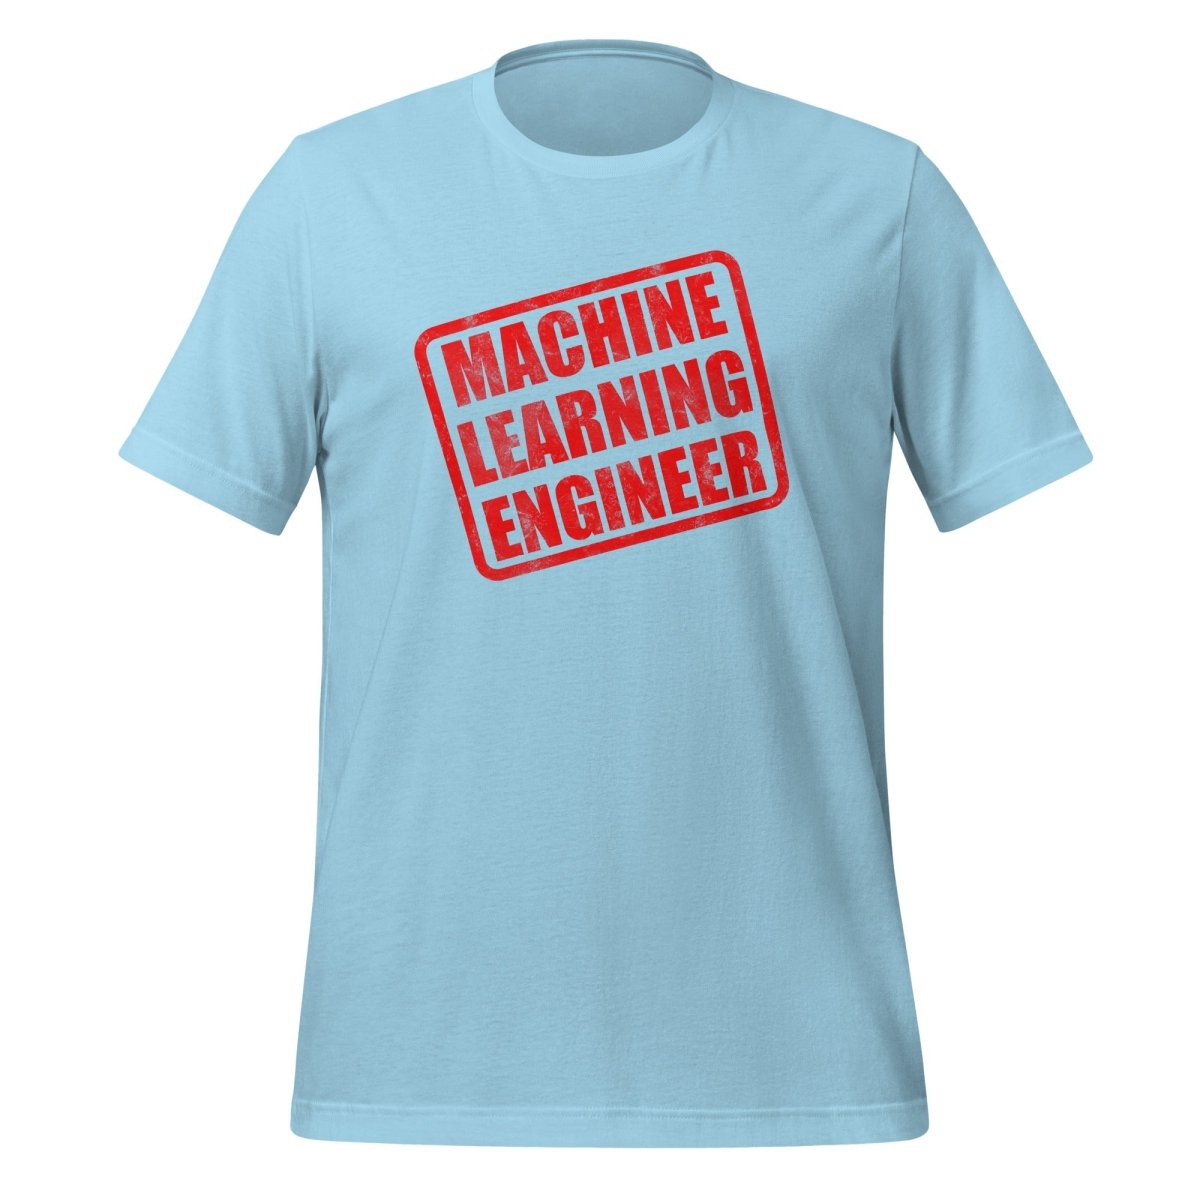 Machine Learning Engineer Stamp T - Shirt (unisex) - Ocean Blue - AI Store